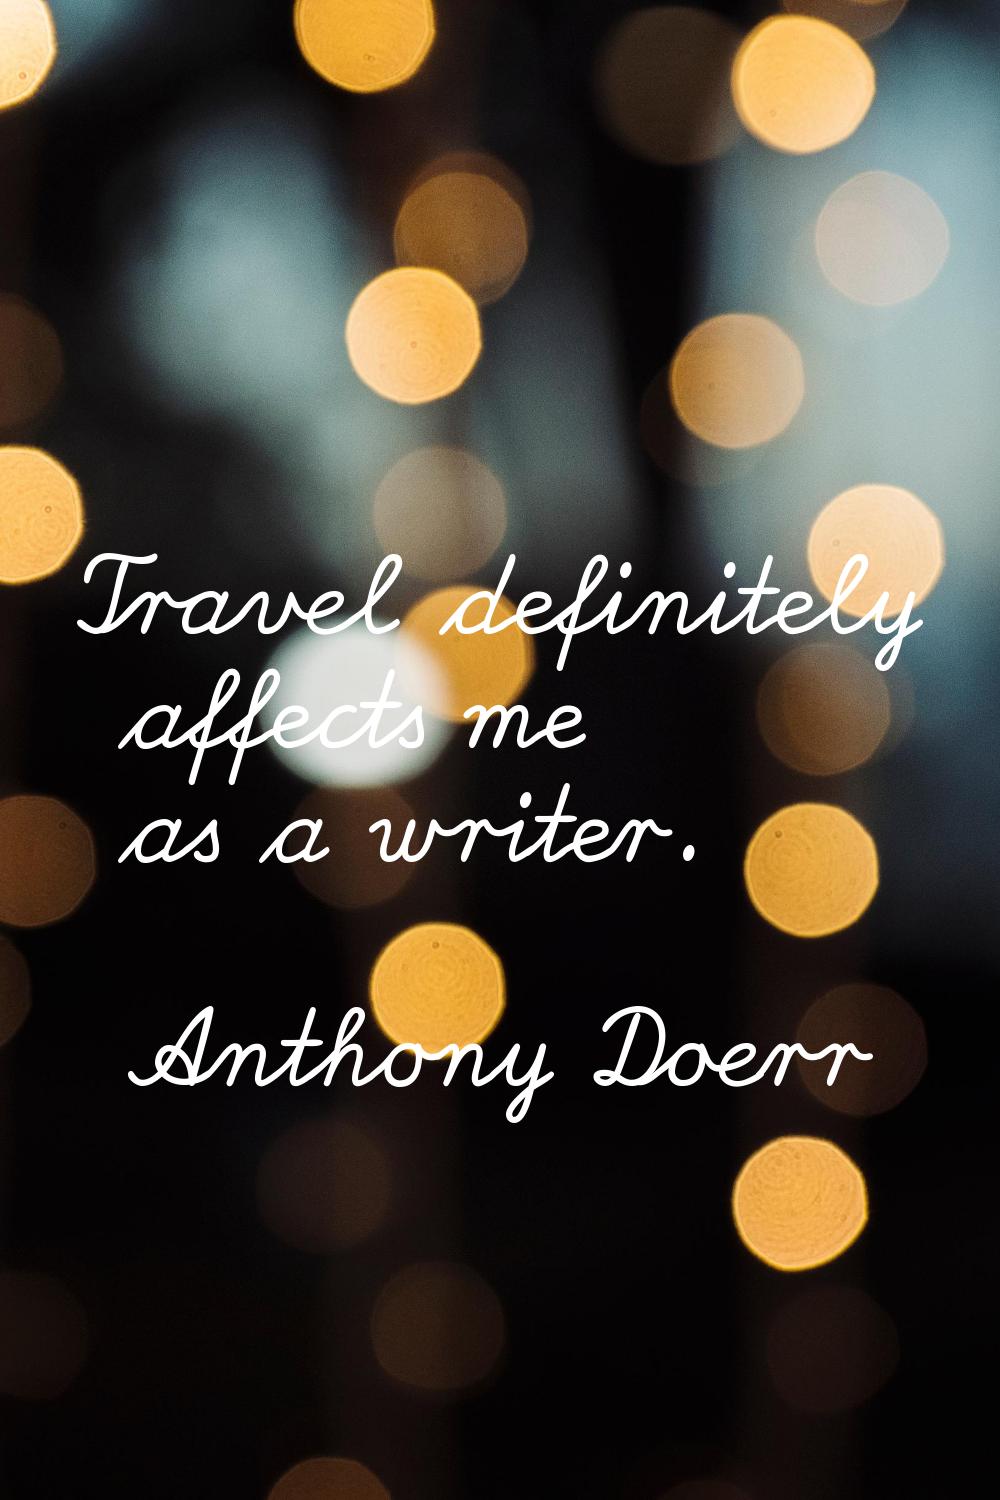 Travel definitely affects me as a writer.